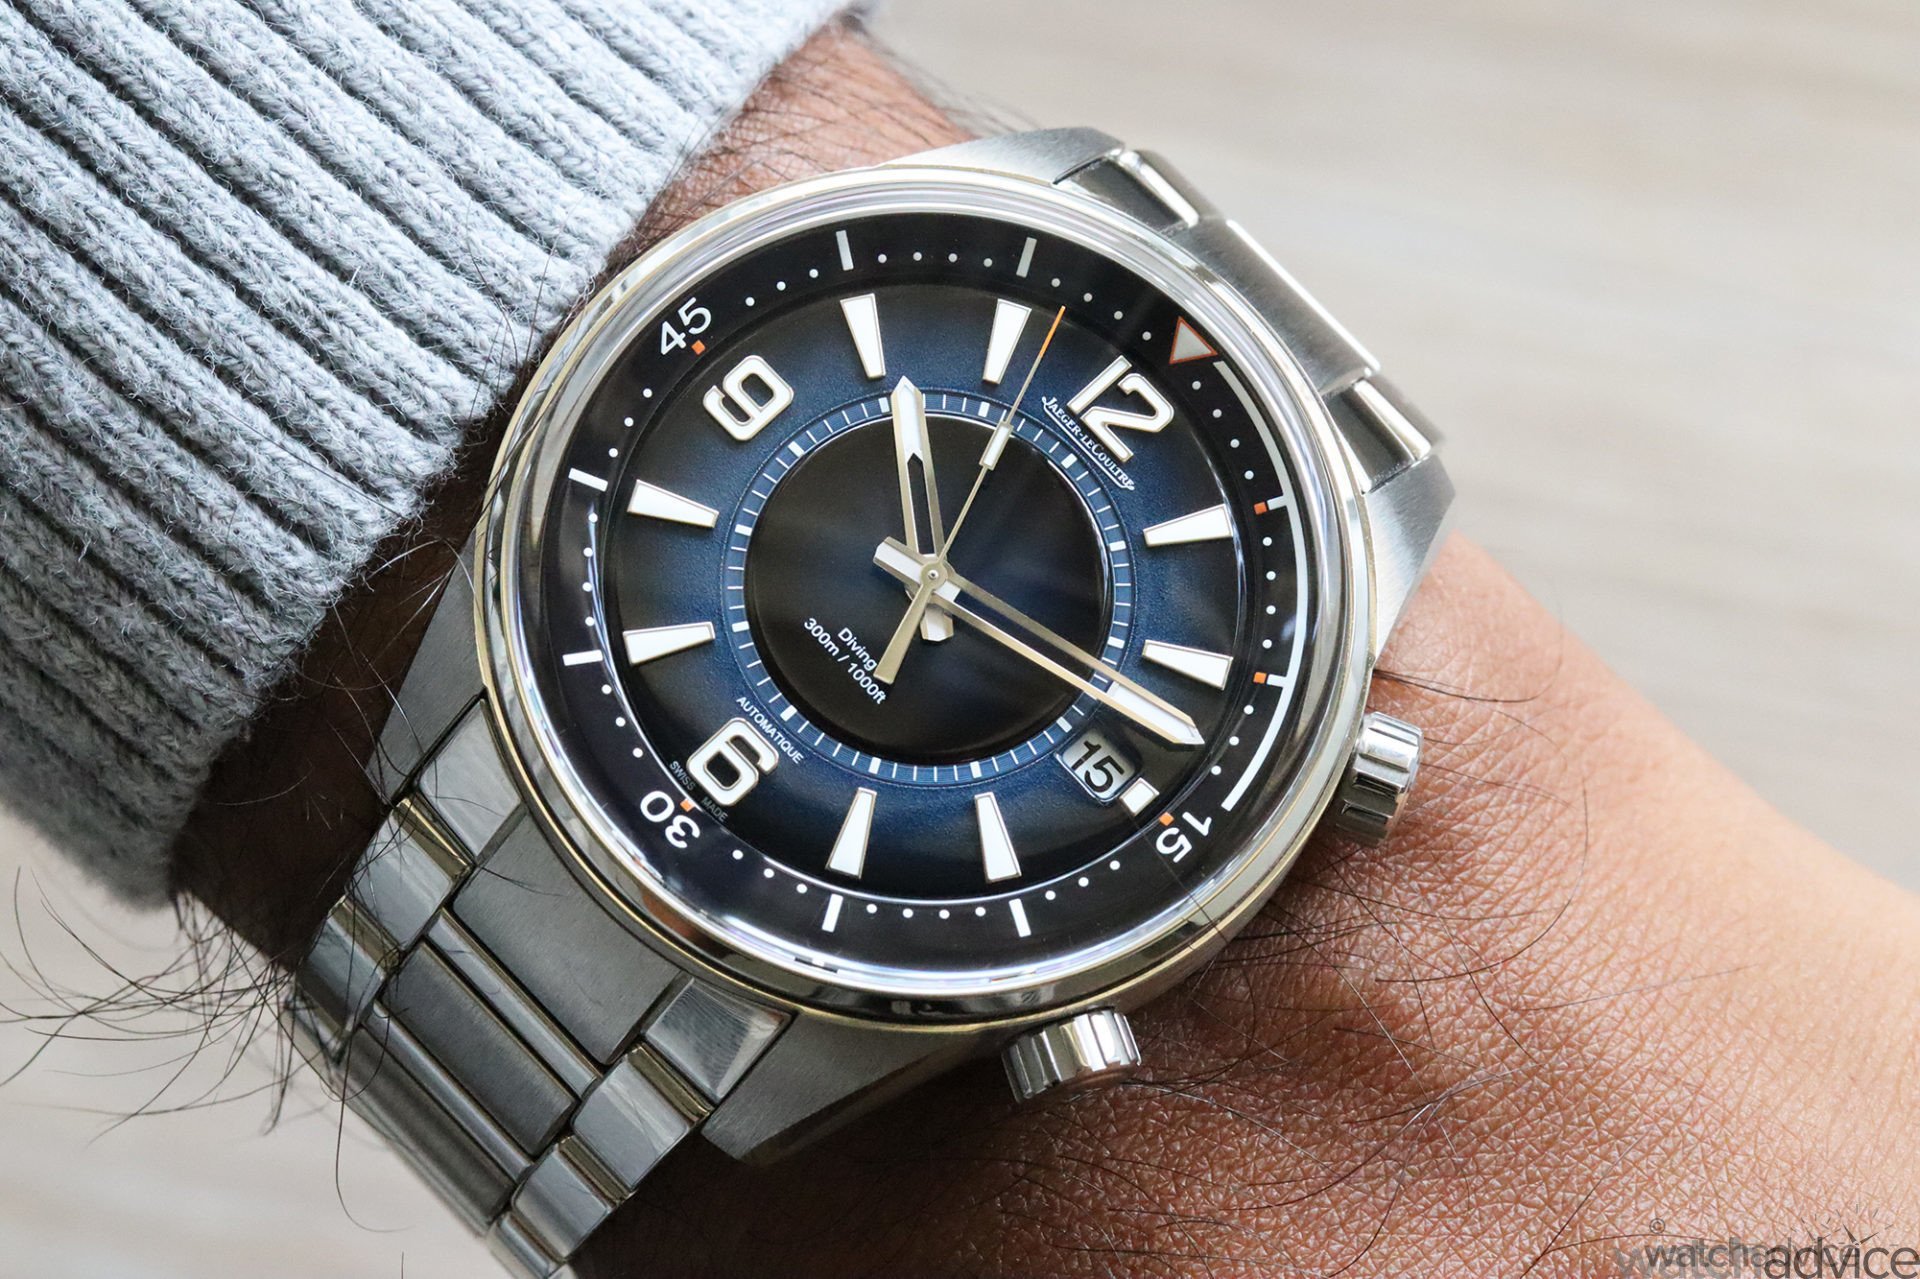 2021 Jaeger-LeCoultre Polaris Mariner Date Review – Watch Advice